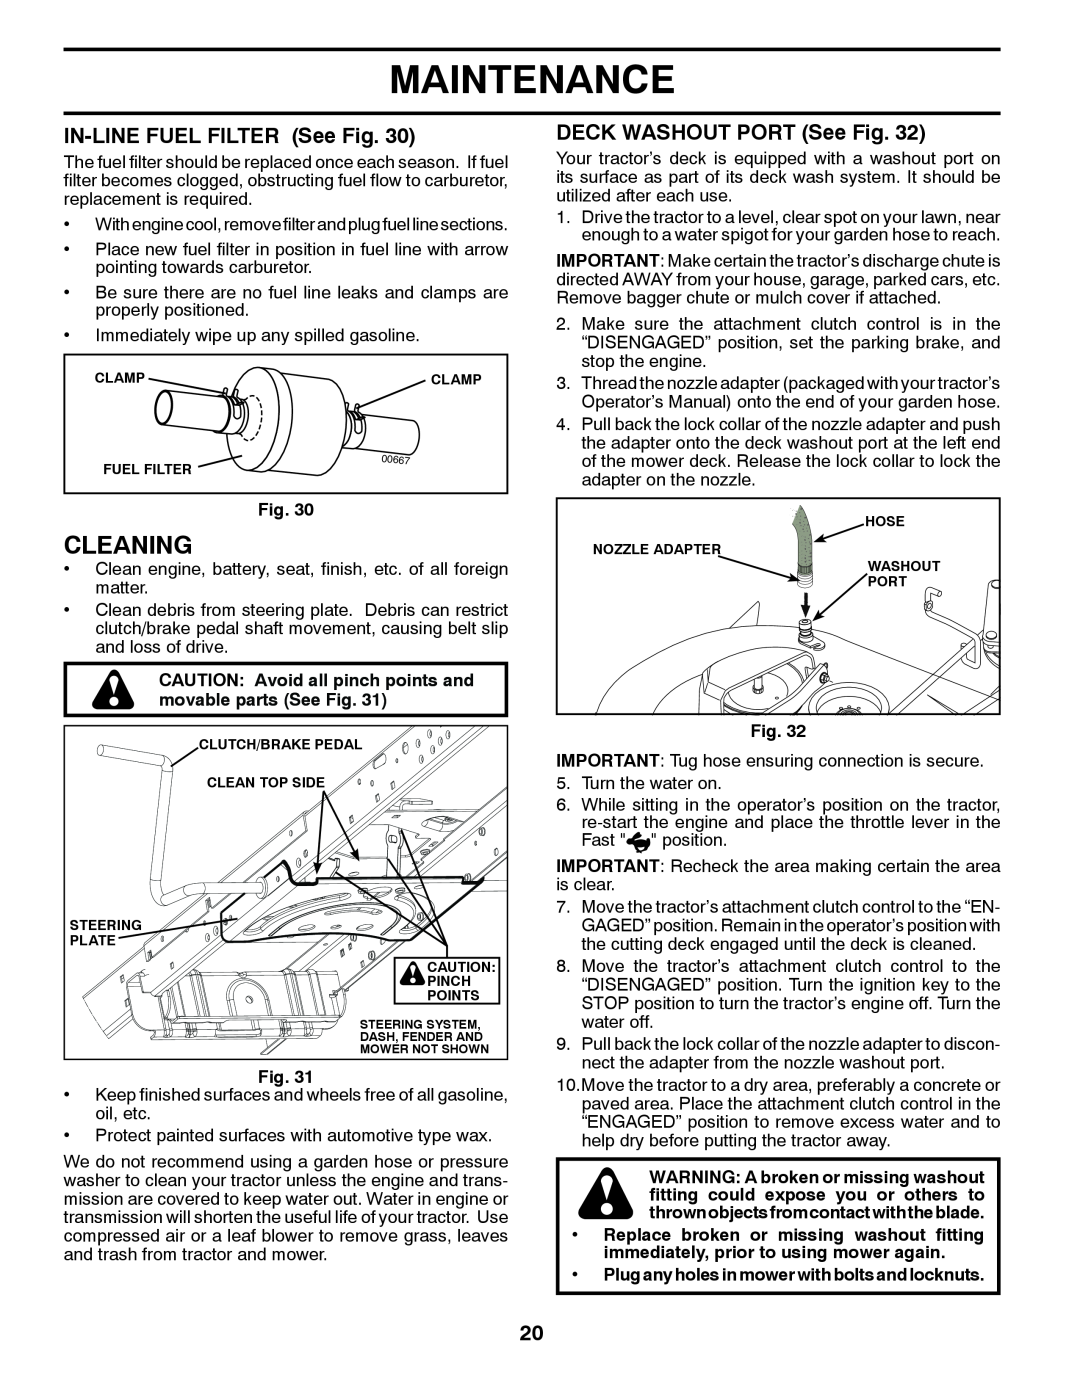 Poulan 436155, 96042011101 manual Cleaning, IN-LINE FUEL FILTER See Fig, DECK WASHOUT PORT See Fig, Maintenance 